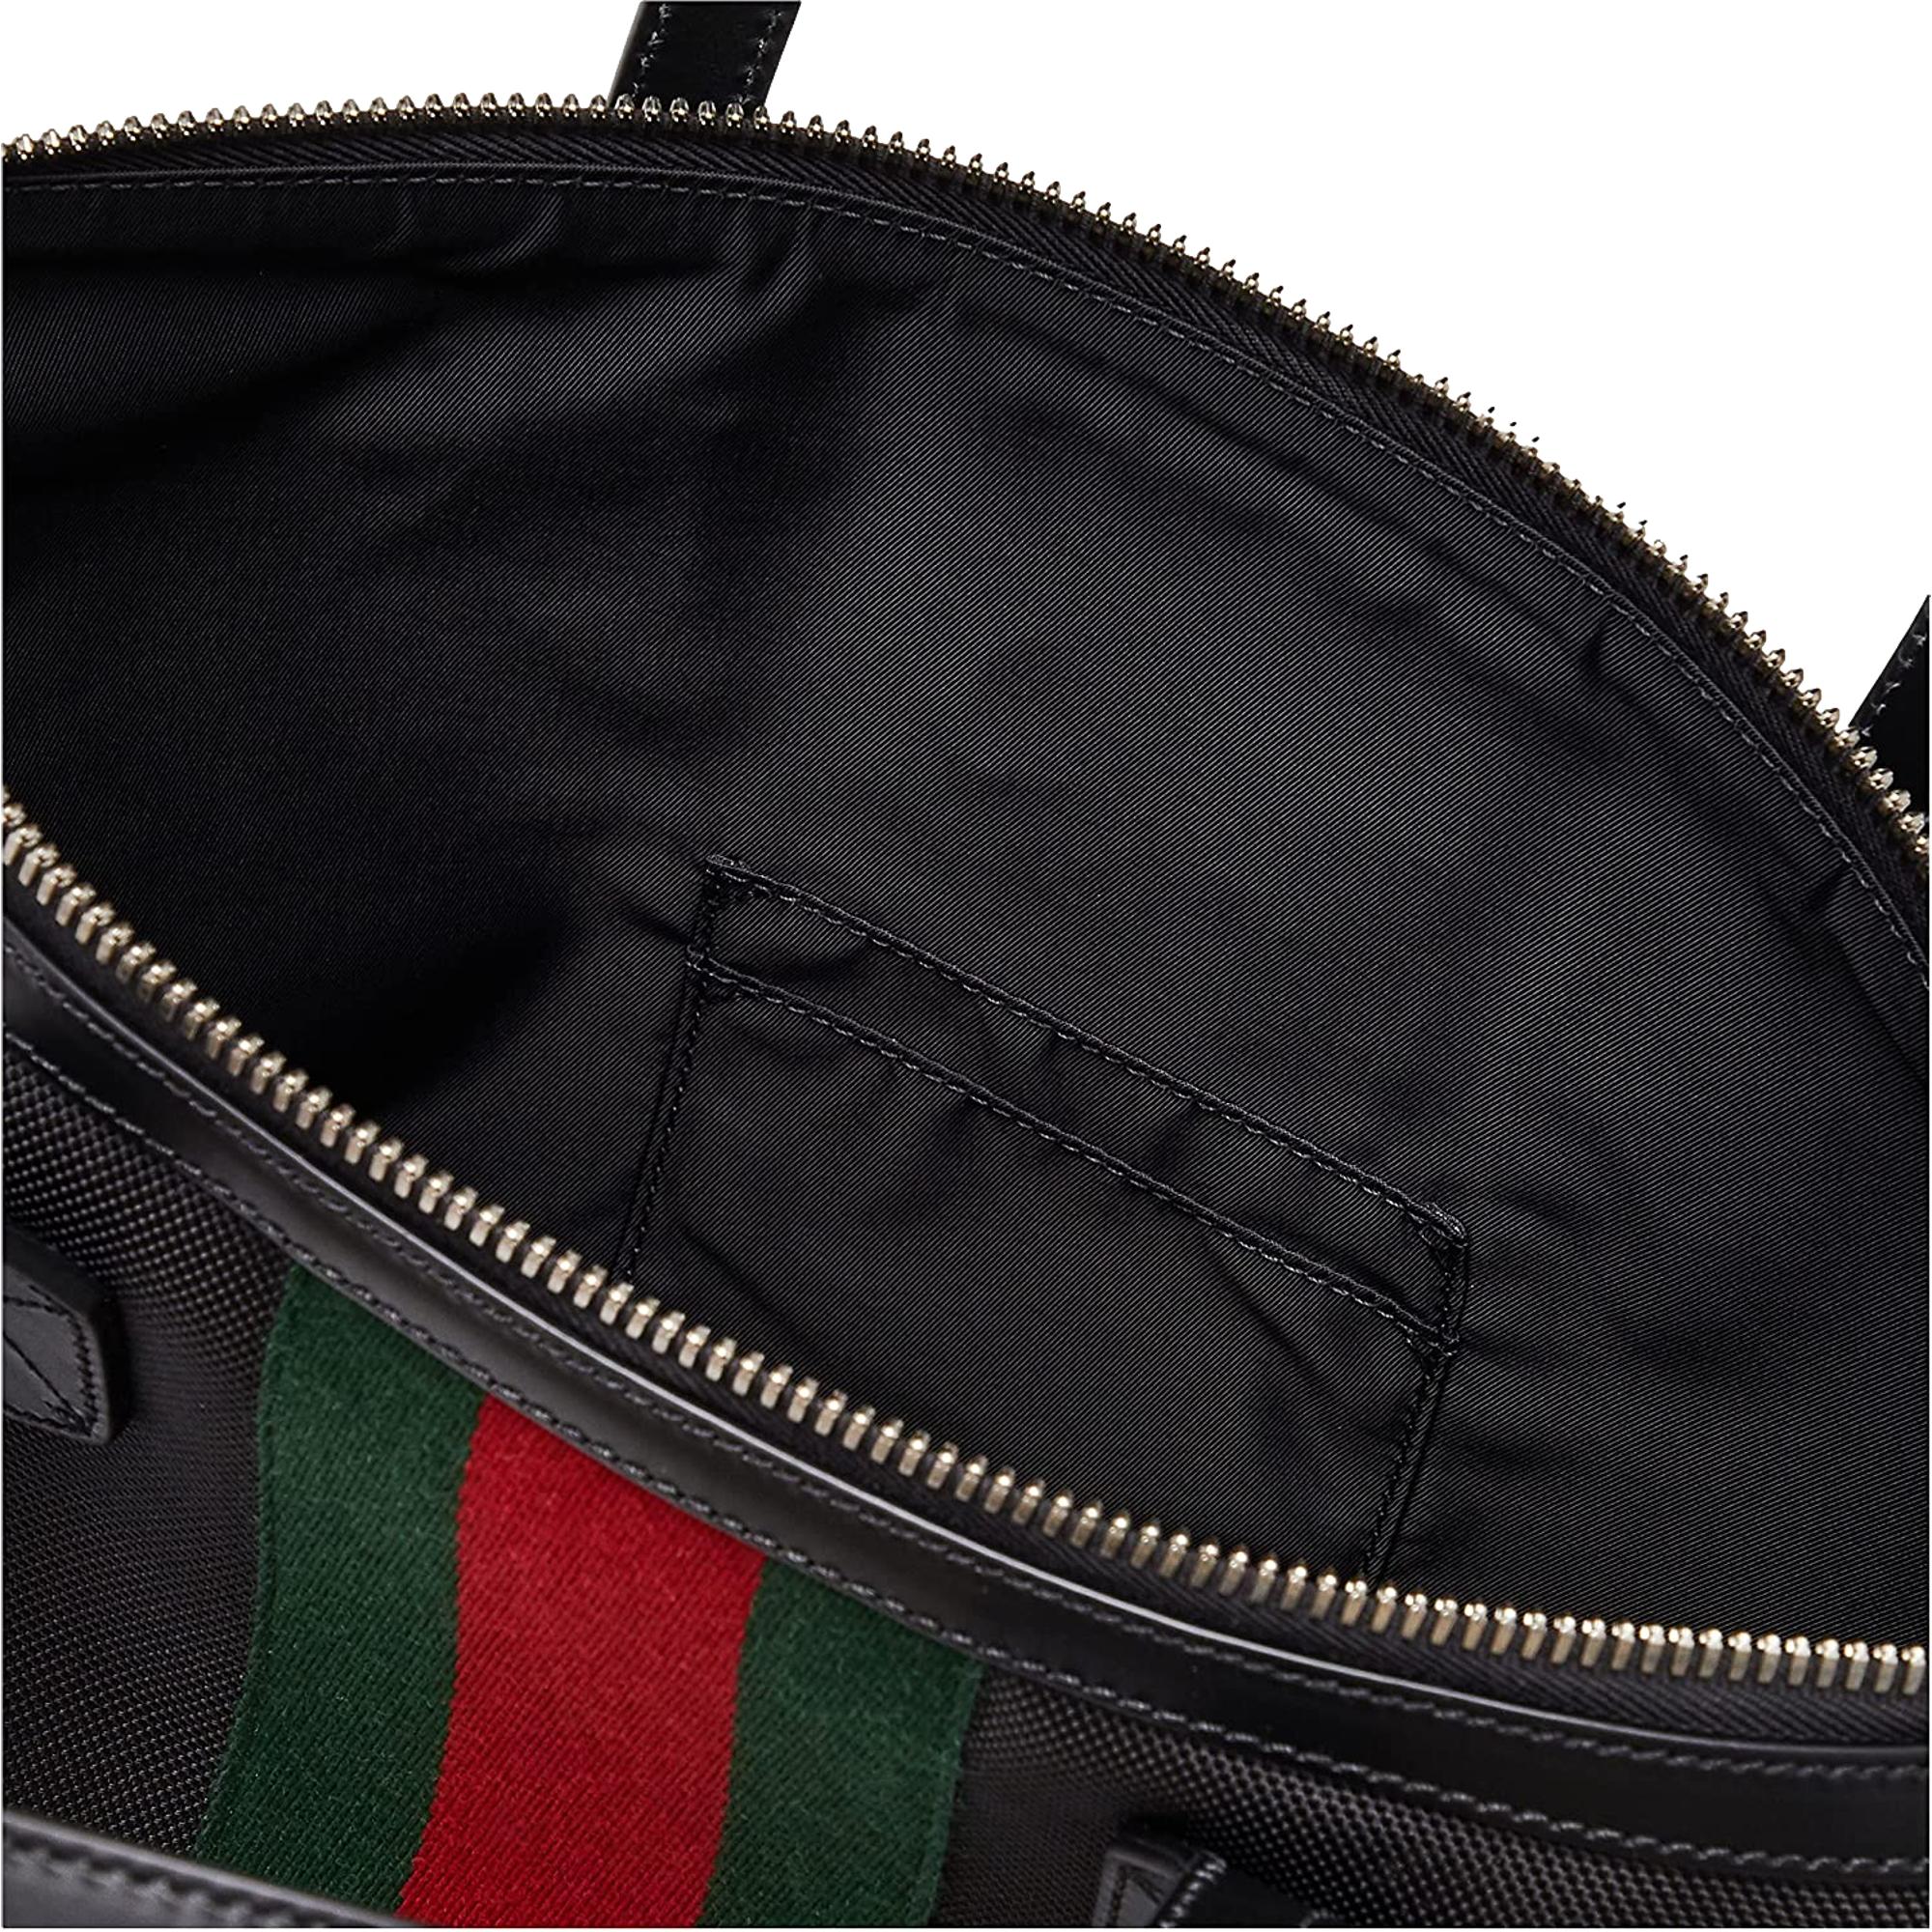 Gucci Black Canvas Web Stripe Tote Handbag 619750 at_Queen_Bee_of_Beverly_Hills